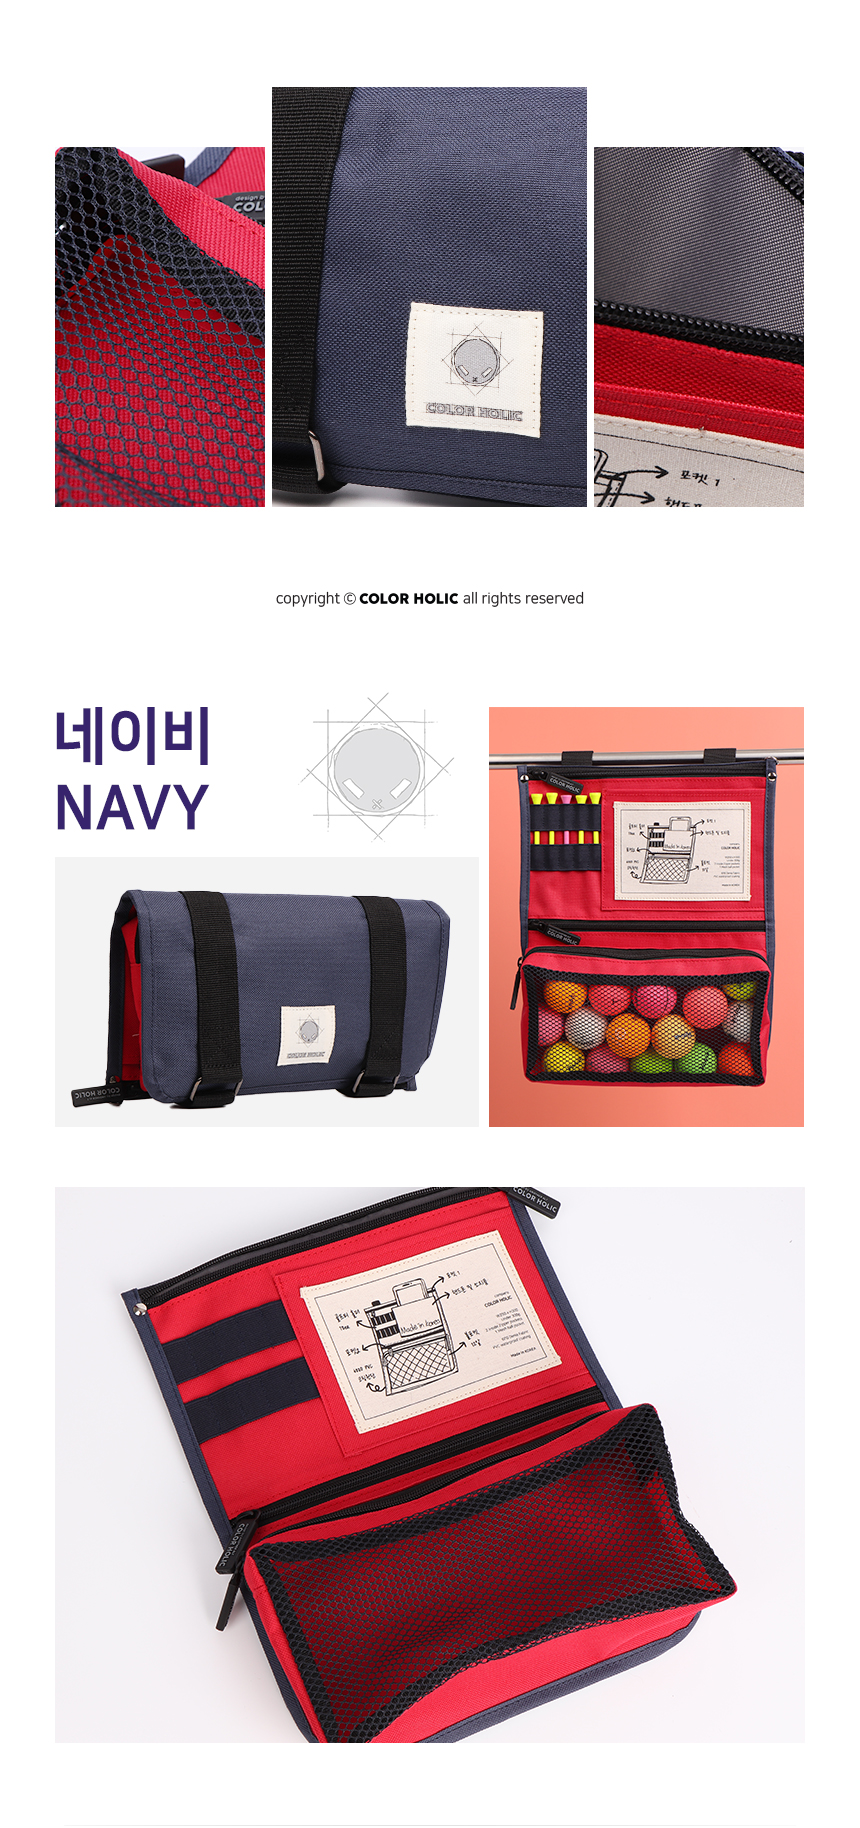 colorholic_golfcart_organizer_pouch_rok_09_page_title_story_box1.jpg